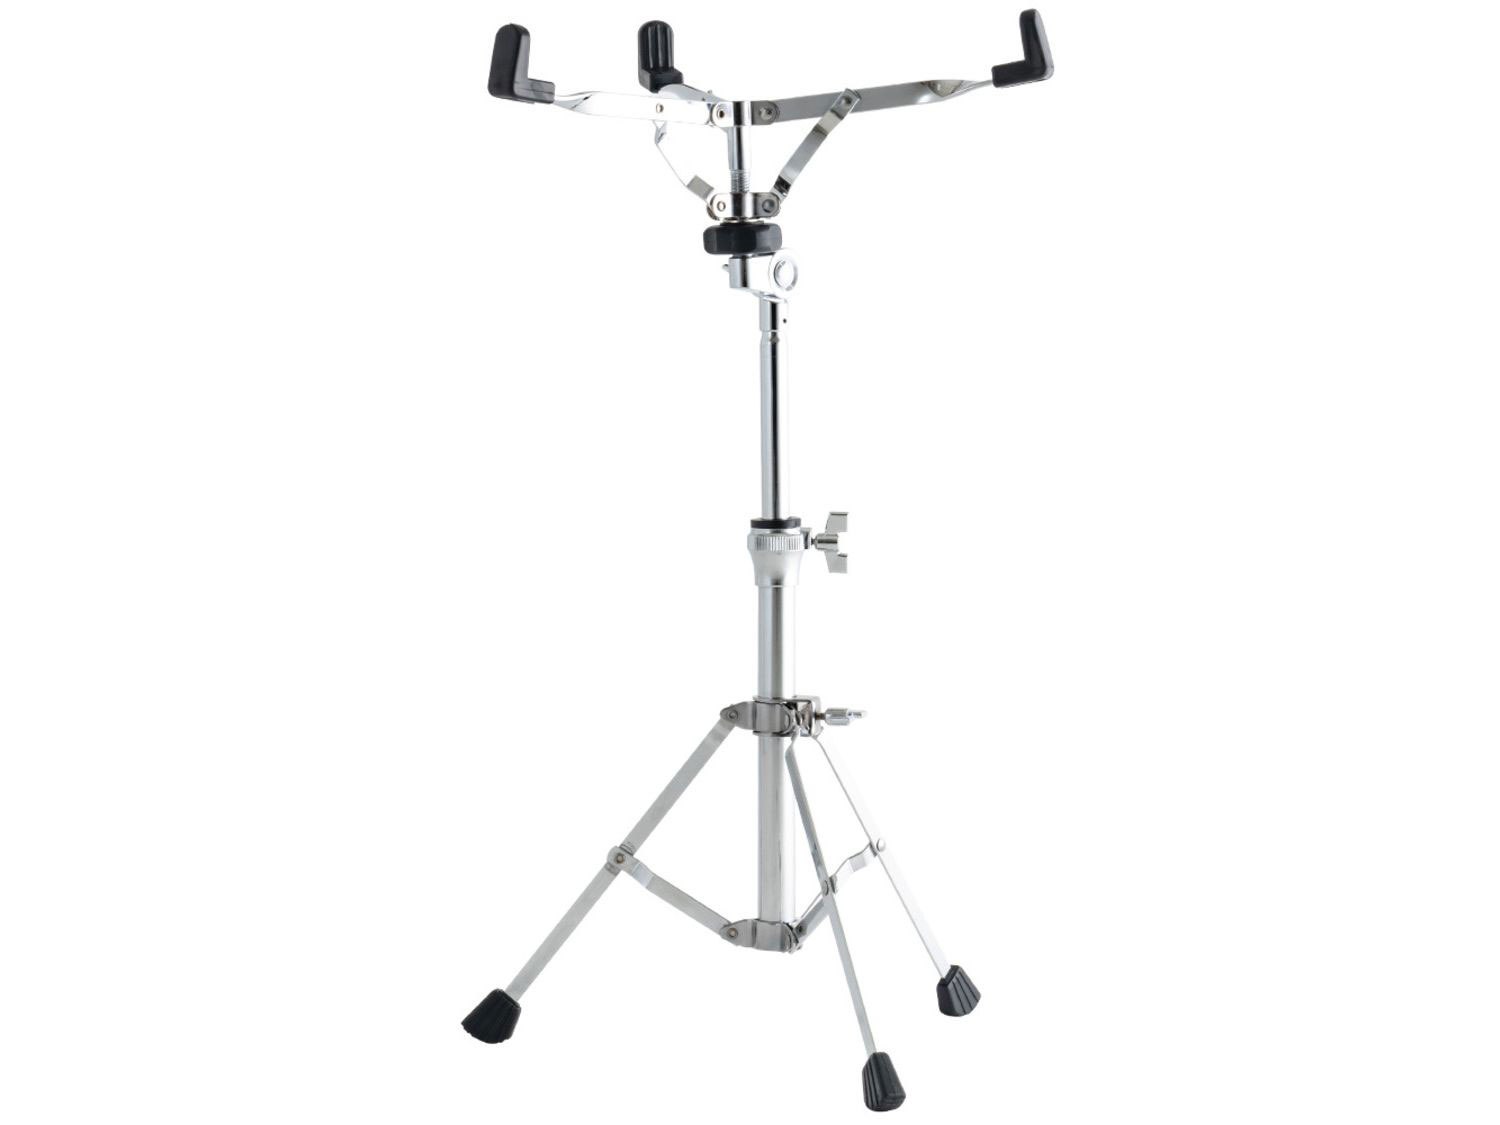 DIXON PSS-P0S - SNARE DRUM STAND - SINGLE BASE